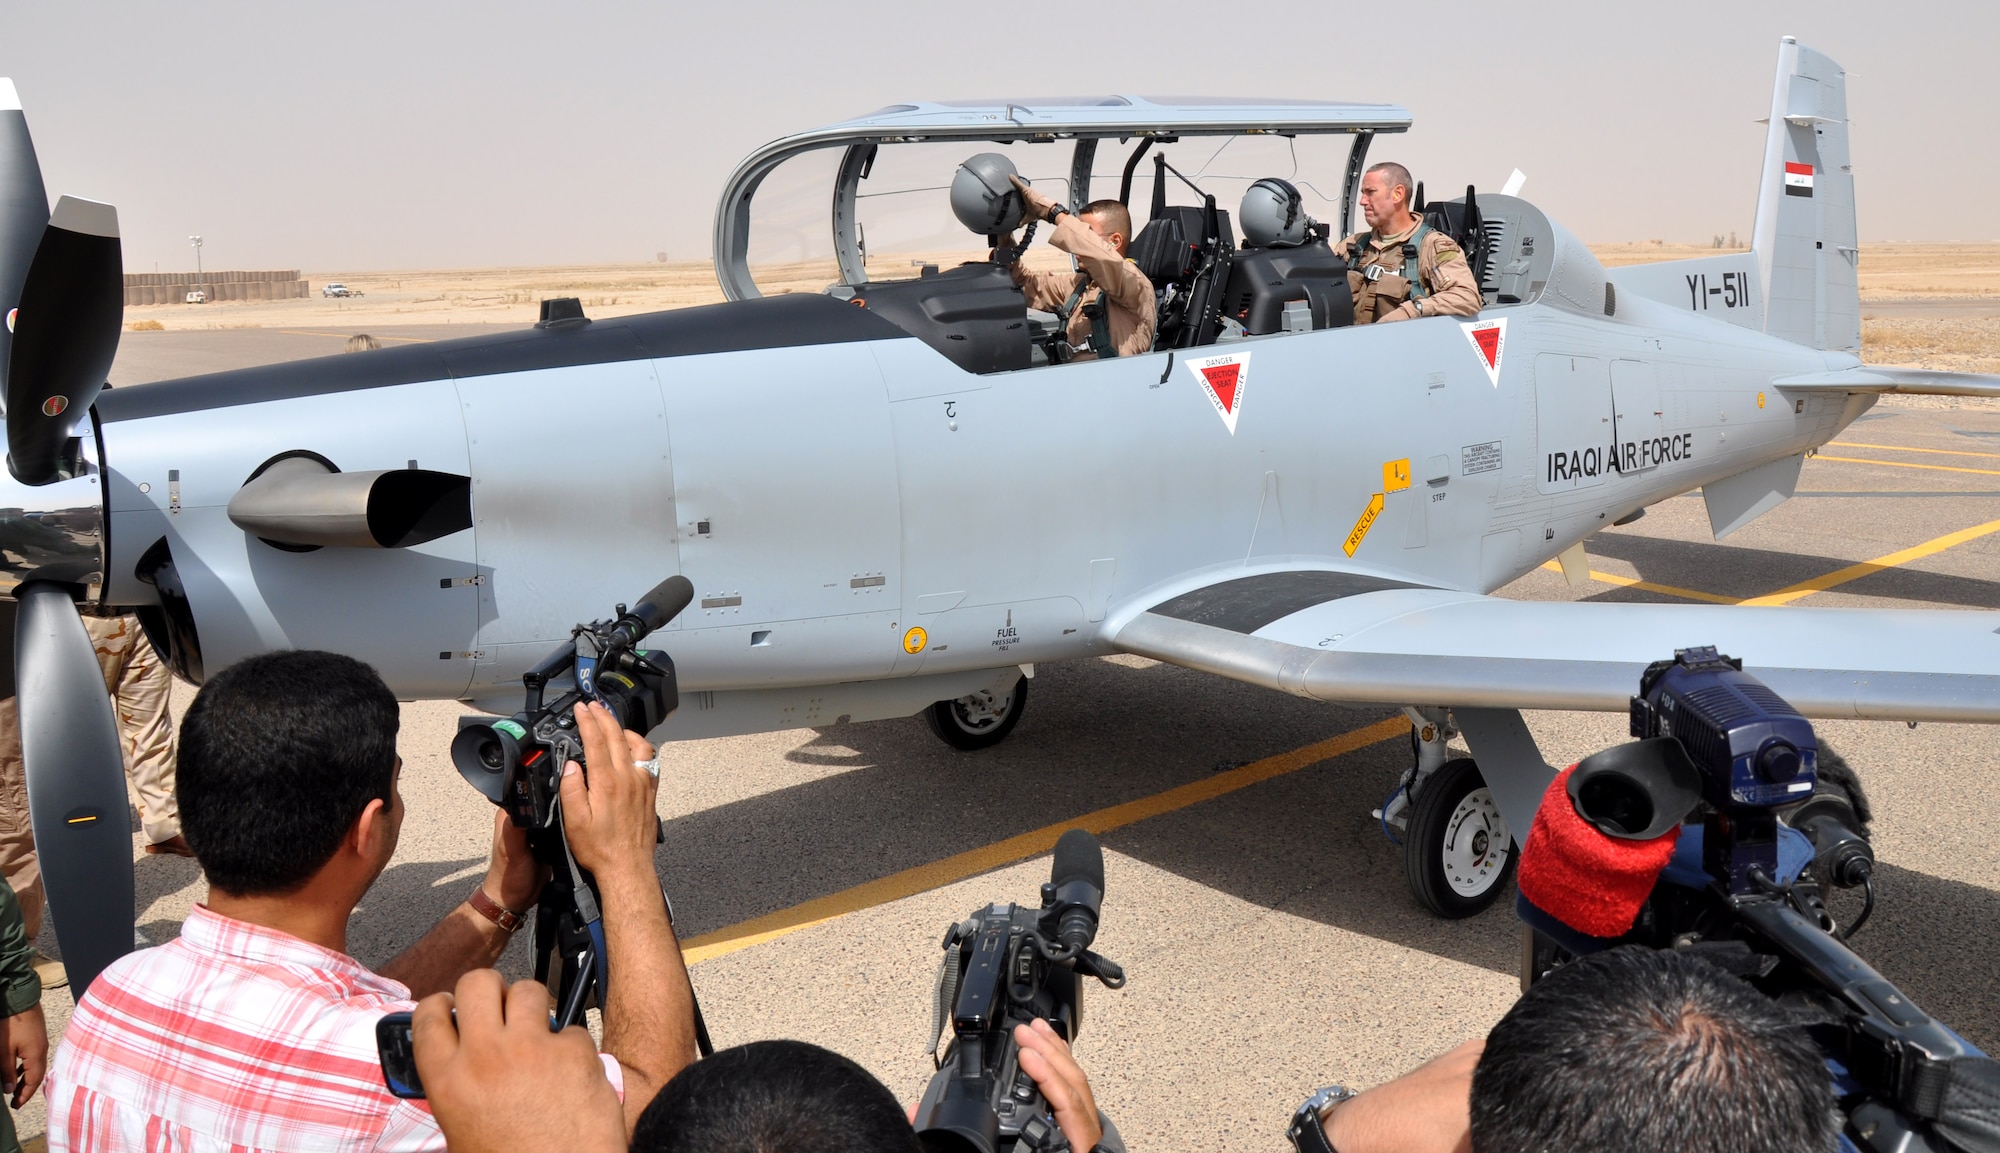 Members of the Iraqi media gather around a T-6A aircraft which arrived at Tikrit Air Base, Iraq, Sept.21.  This plane was part of a delivery of three new T-6A aircraft from Jordan, where they had been delivered by the manufacturer, Hawker-Beechcraft.  These planes were piloted to Iraq by members of the Iraqi Air Force, bringing their inventory to 11 aircraft in use for the pilot training program at the college.  (U.S. Air Force photo by Tech. Sgt. Mike Edwards)